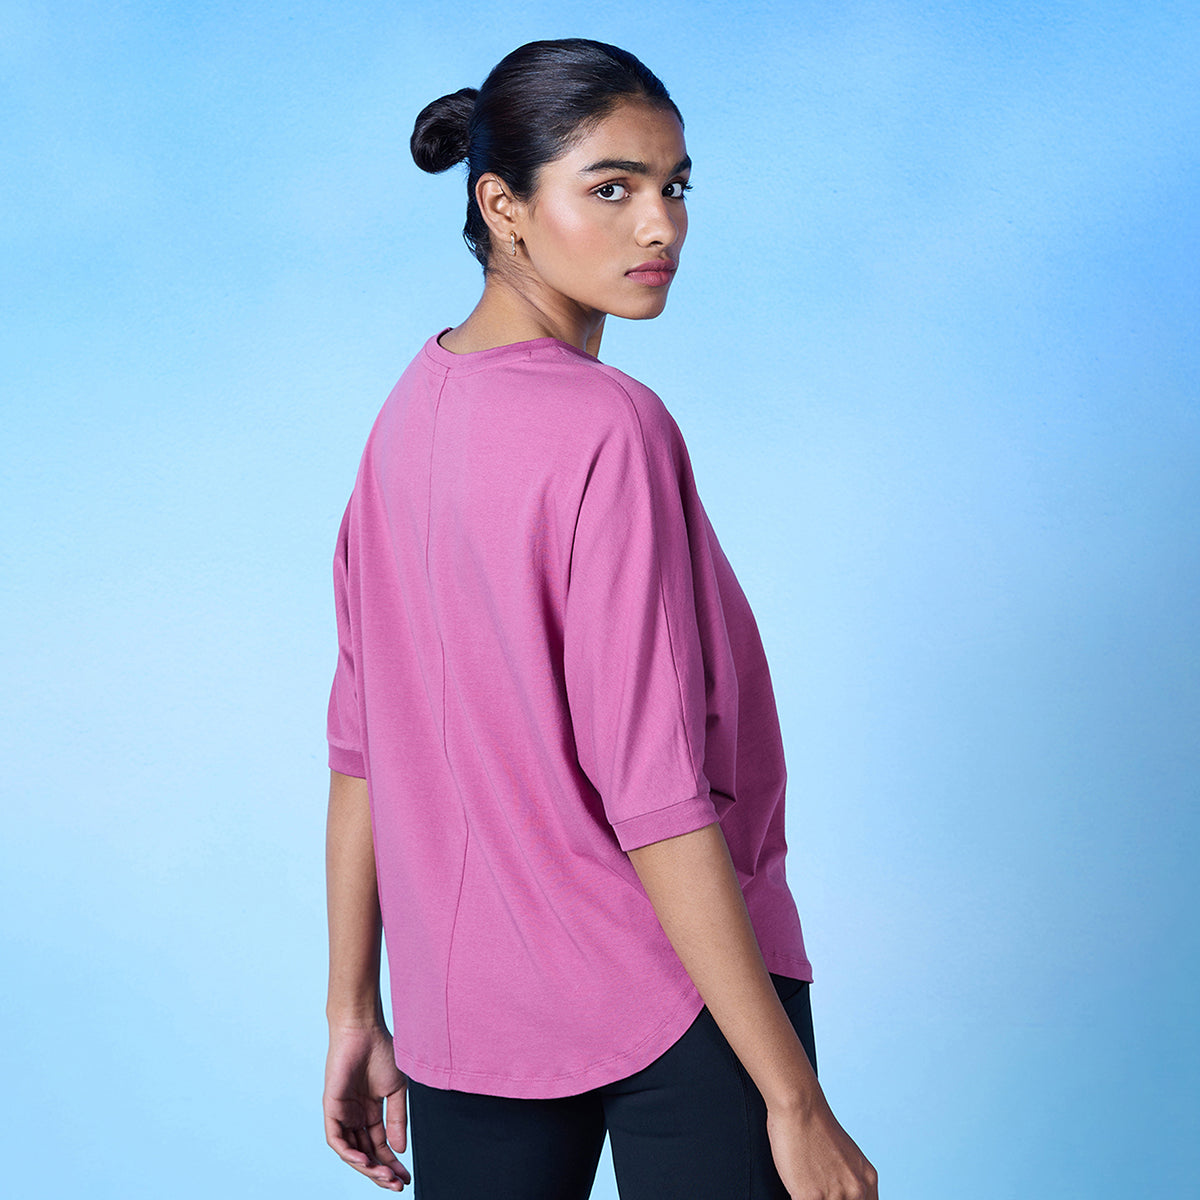 Nykd All Day Cotton Dolman Tee - NYLE278 - Red violet